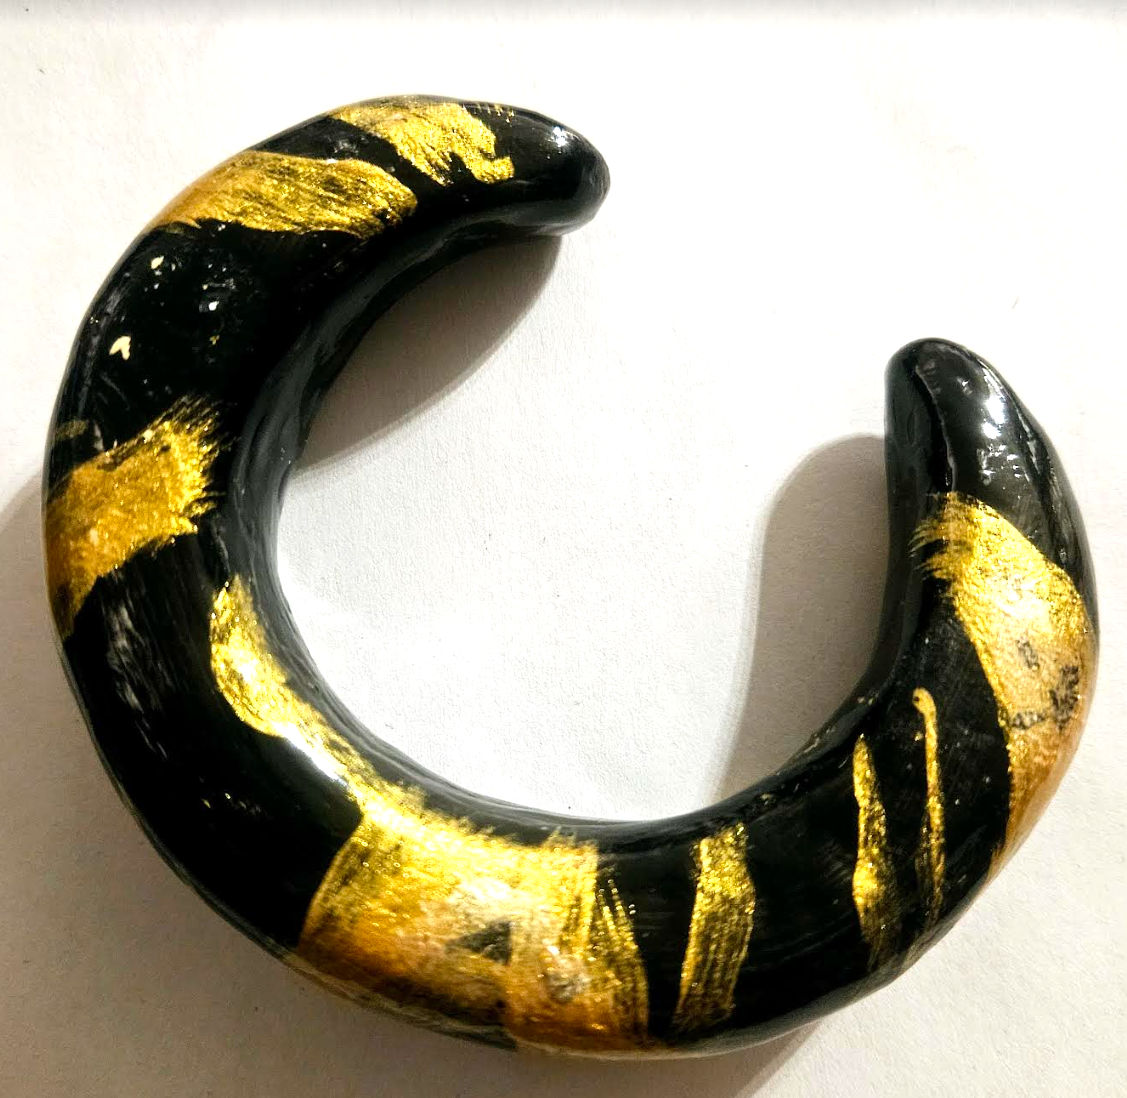 Black & Gold Hand Sculpted Bangle, Hand Painted Heavy Statement Cuff, Photoshoot Jewelry from Kat Kouture